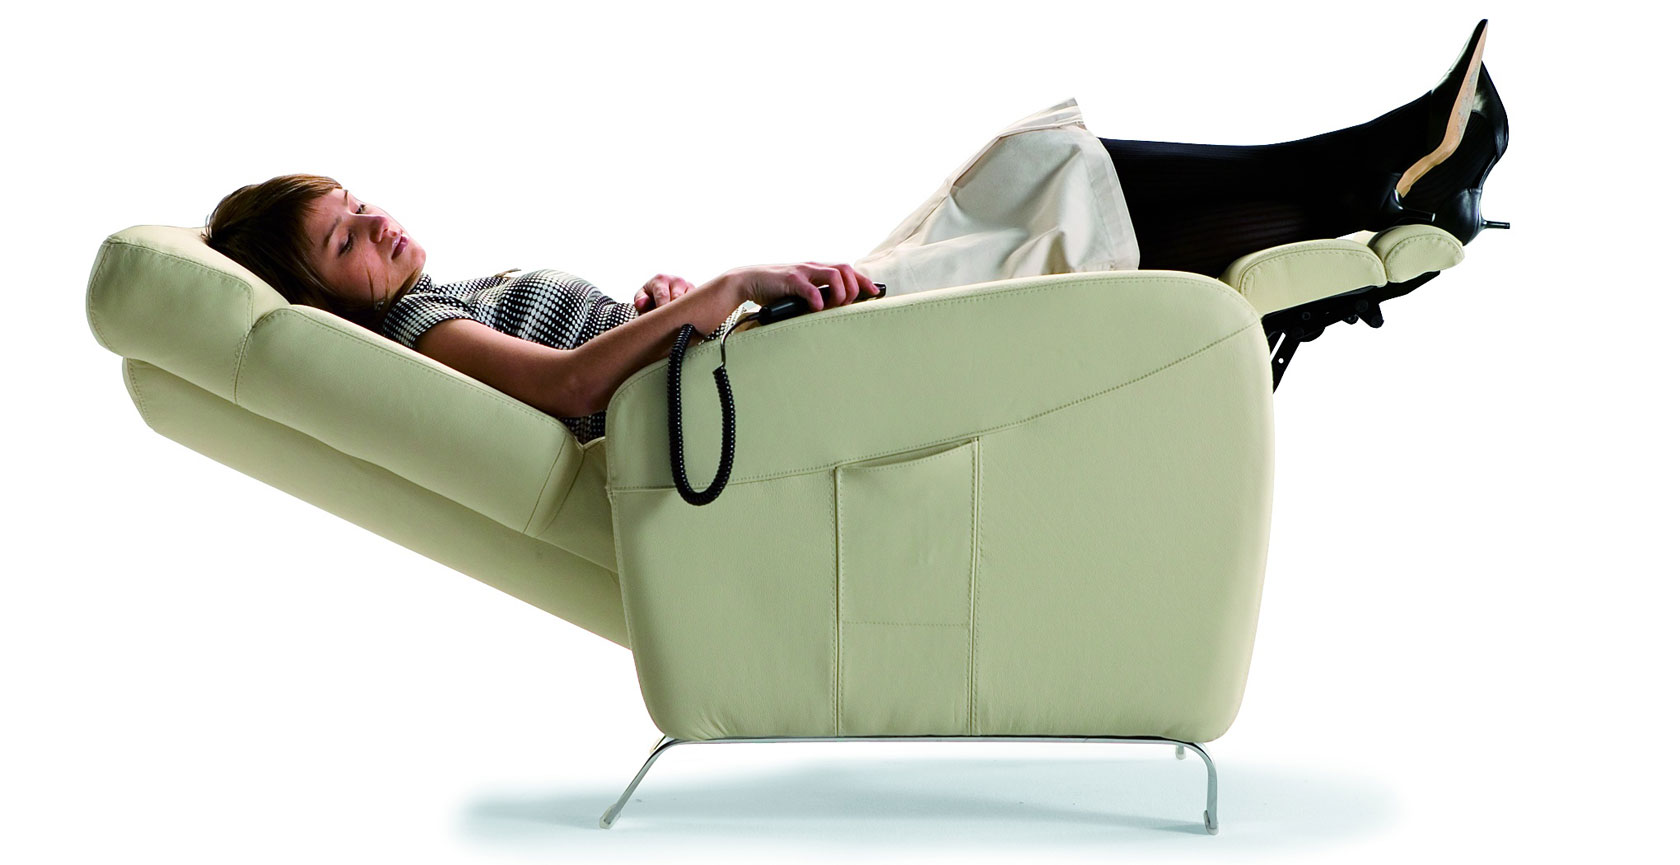 Sillones Reclinables Electricos